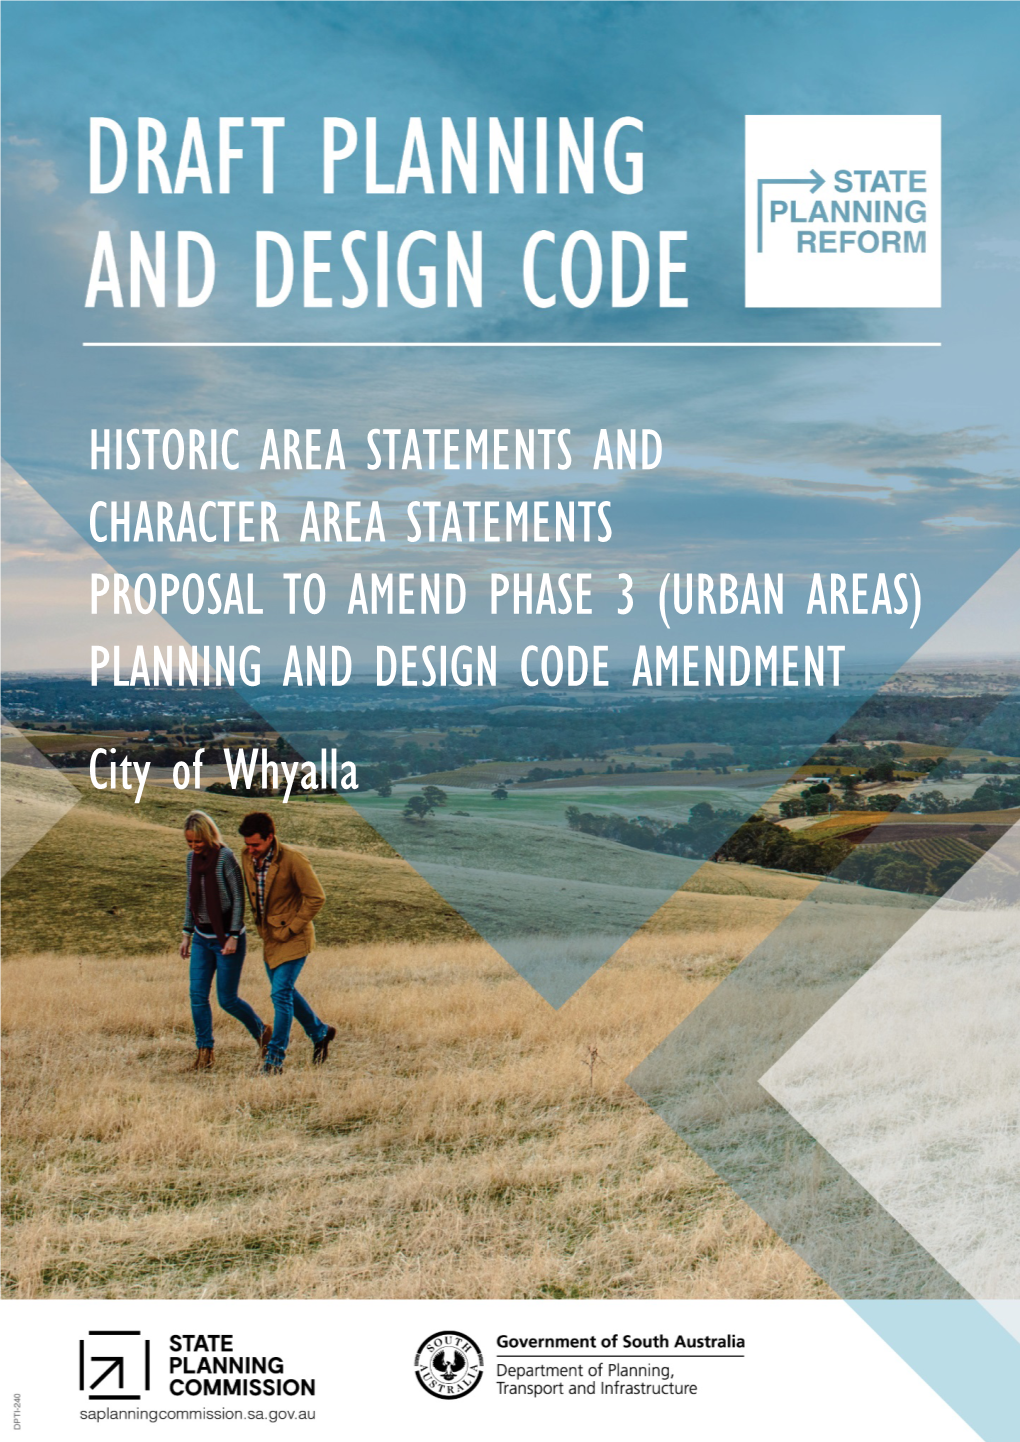 HISTORIC AREA STATEMENTS and CHARACTER AREA STATEMENTS PROPOSAL to AMEND PHASE 3 (URBAN AREAS) PLANNING and DESIGN CODE AMENDMENT City of Whyalla